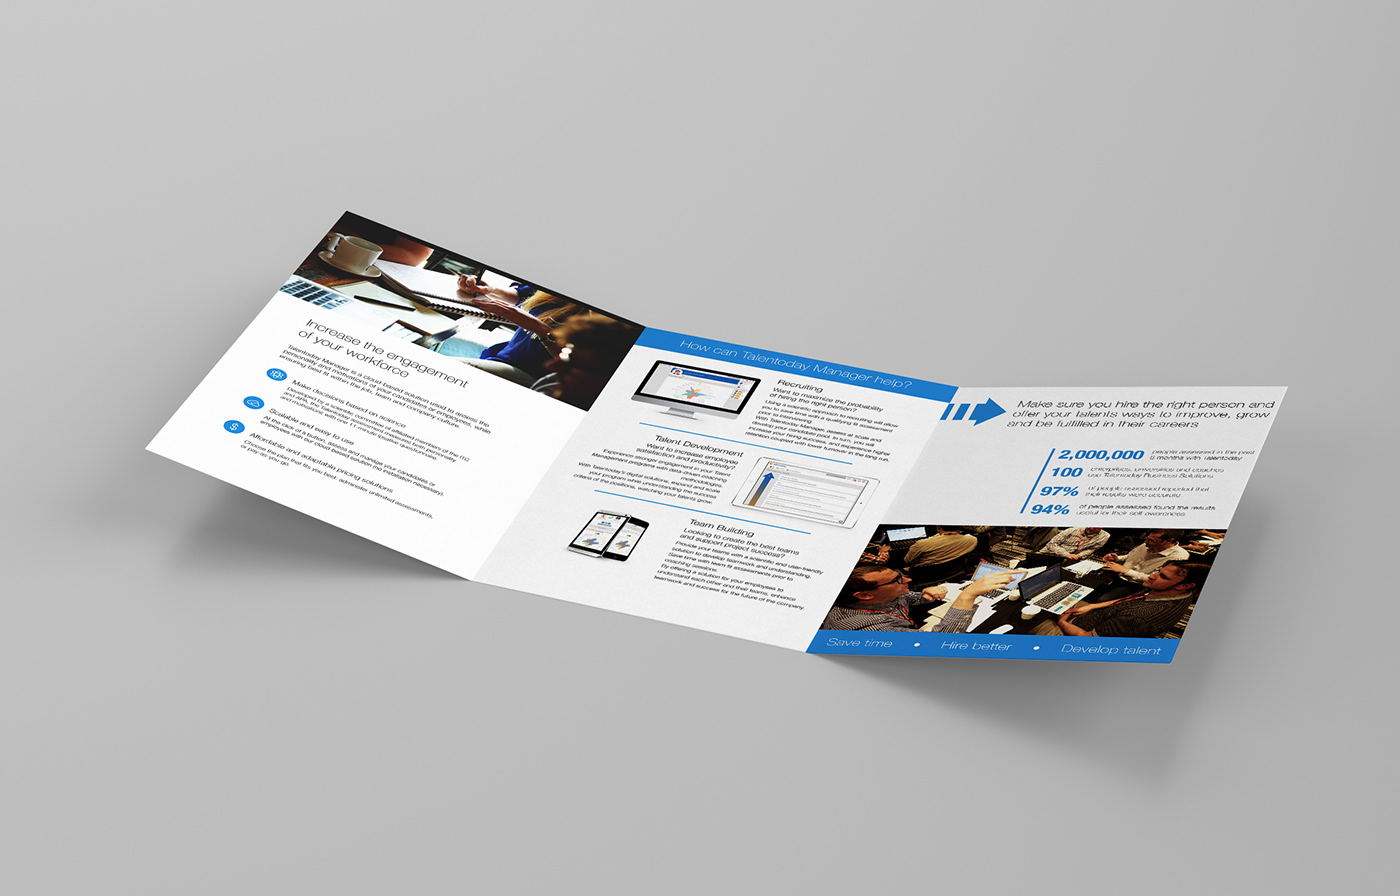 print Collateral marketing   branding  Layout career guidance Human Resources Assessment Education Layout print design 